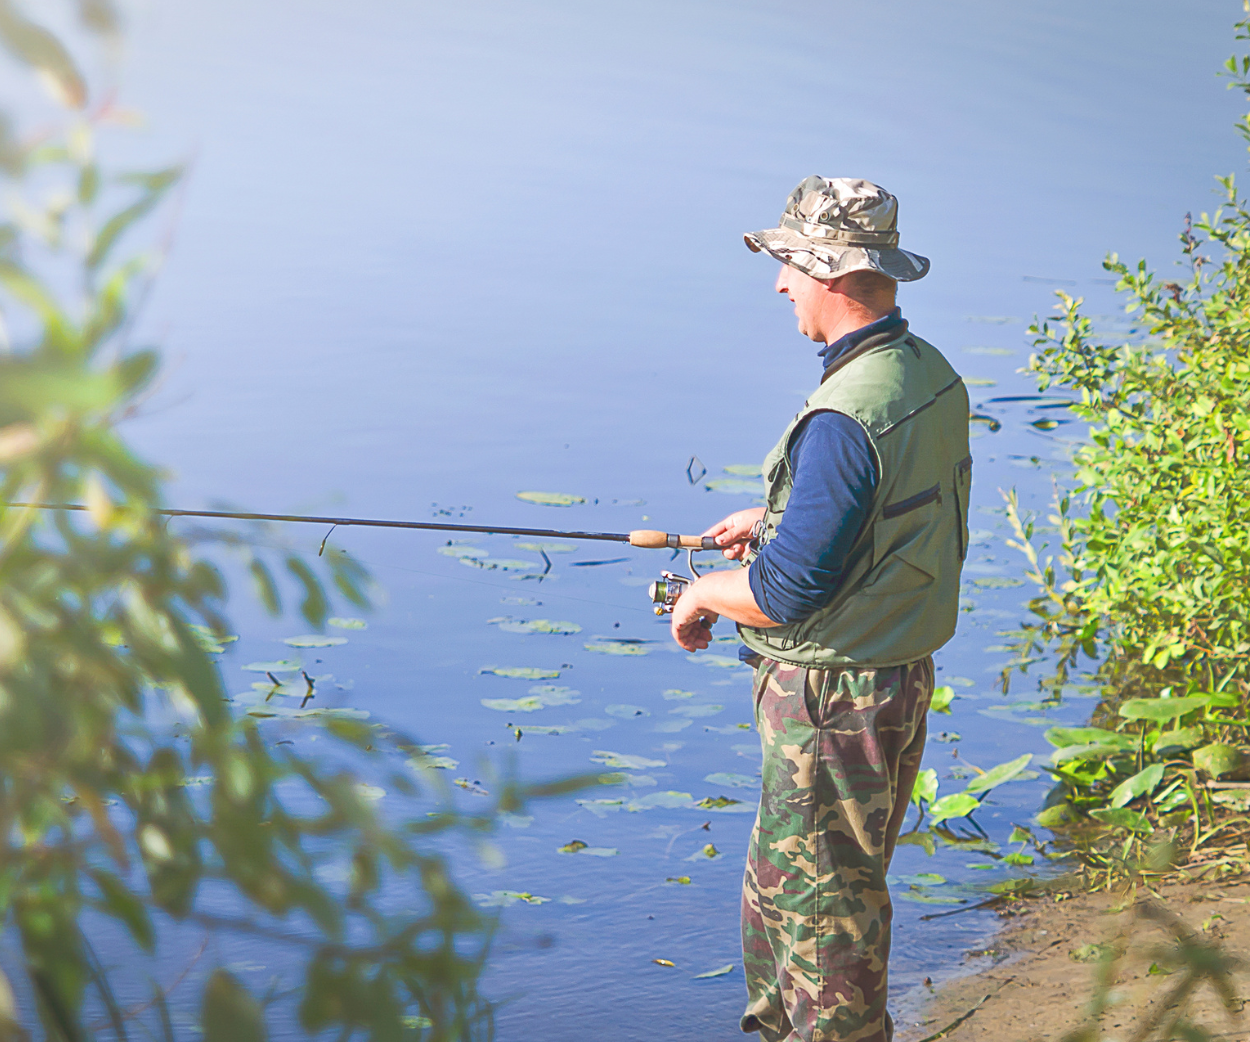 Let's Fish - Over 50s Social Angling 